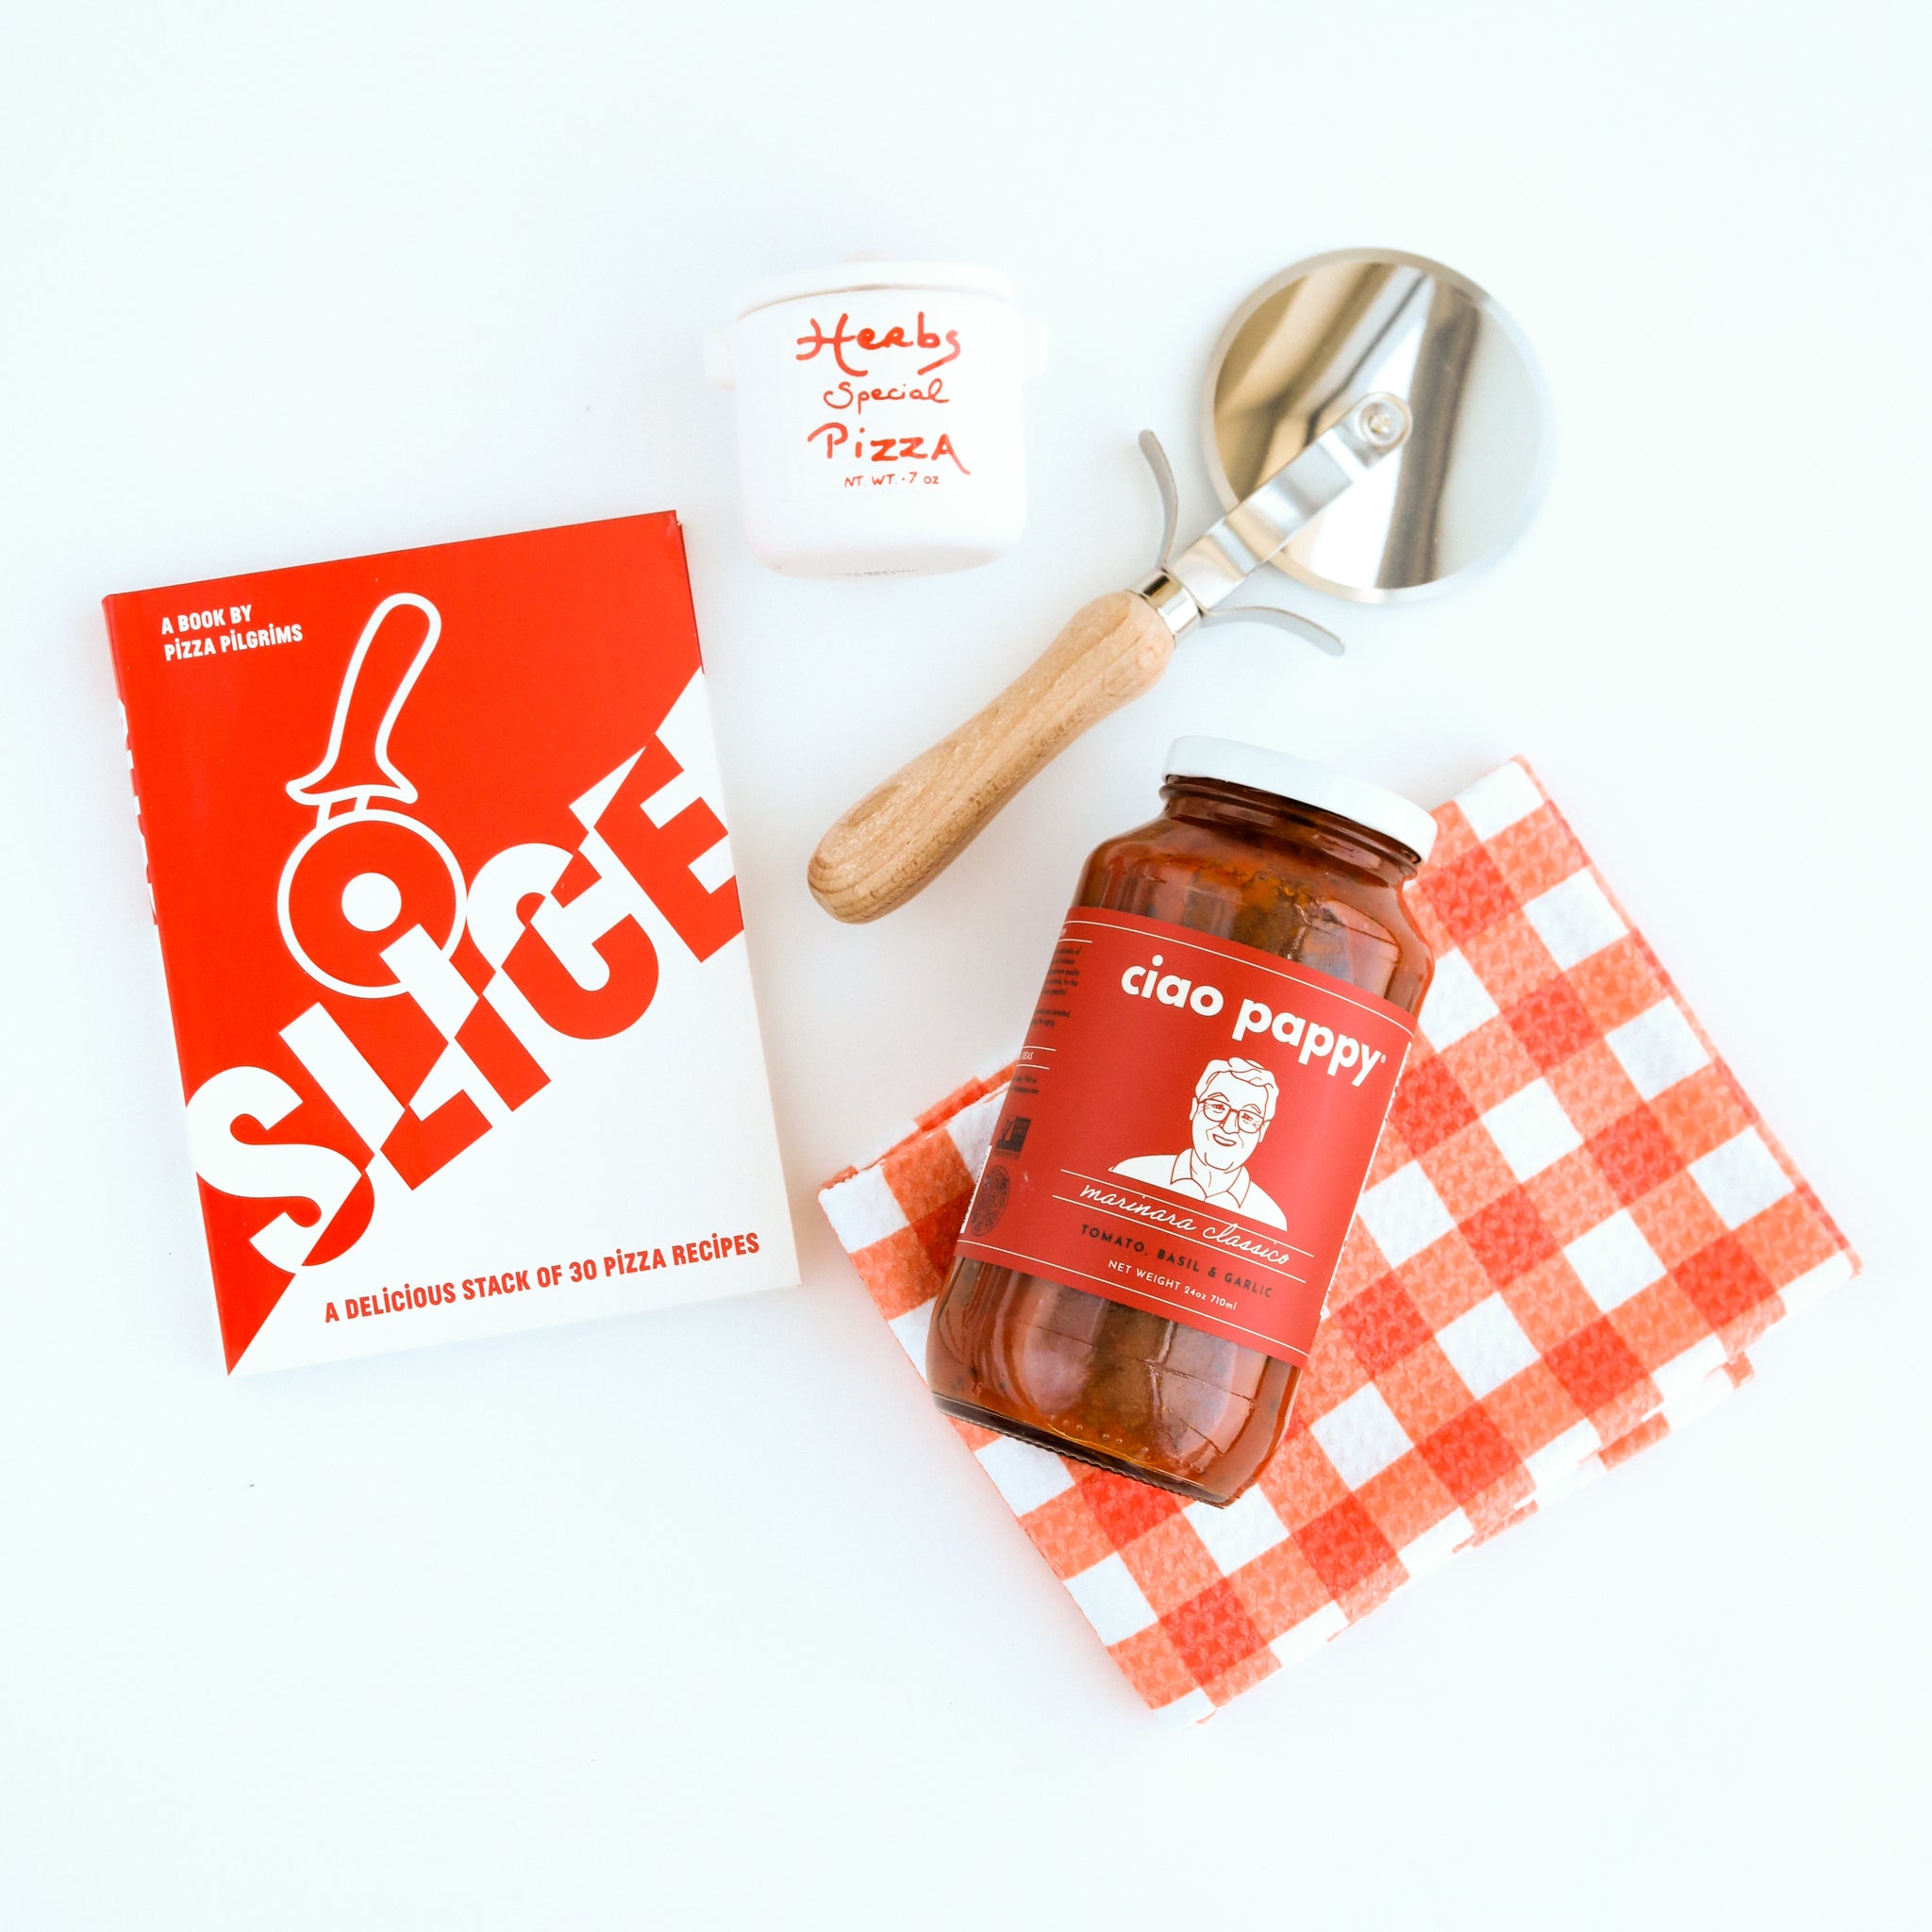  &quot;Slice&quot; Pizza book, wood pizza cutter, Ciao Pappy Marinara sauce, Pizza herbs jar and plaid red Geometry tea towel.